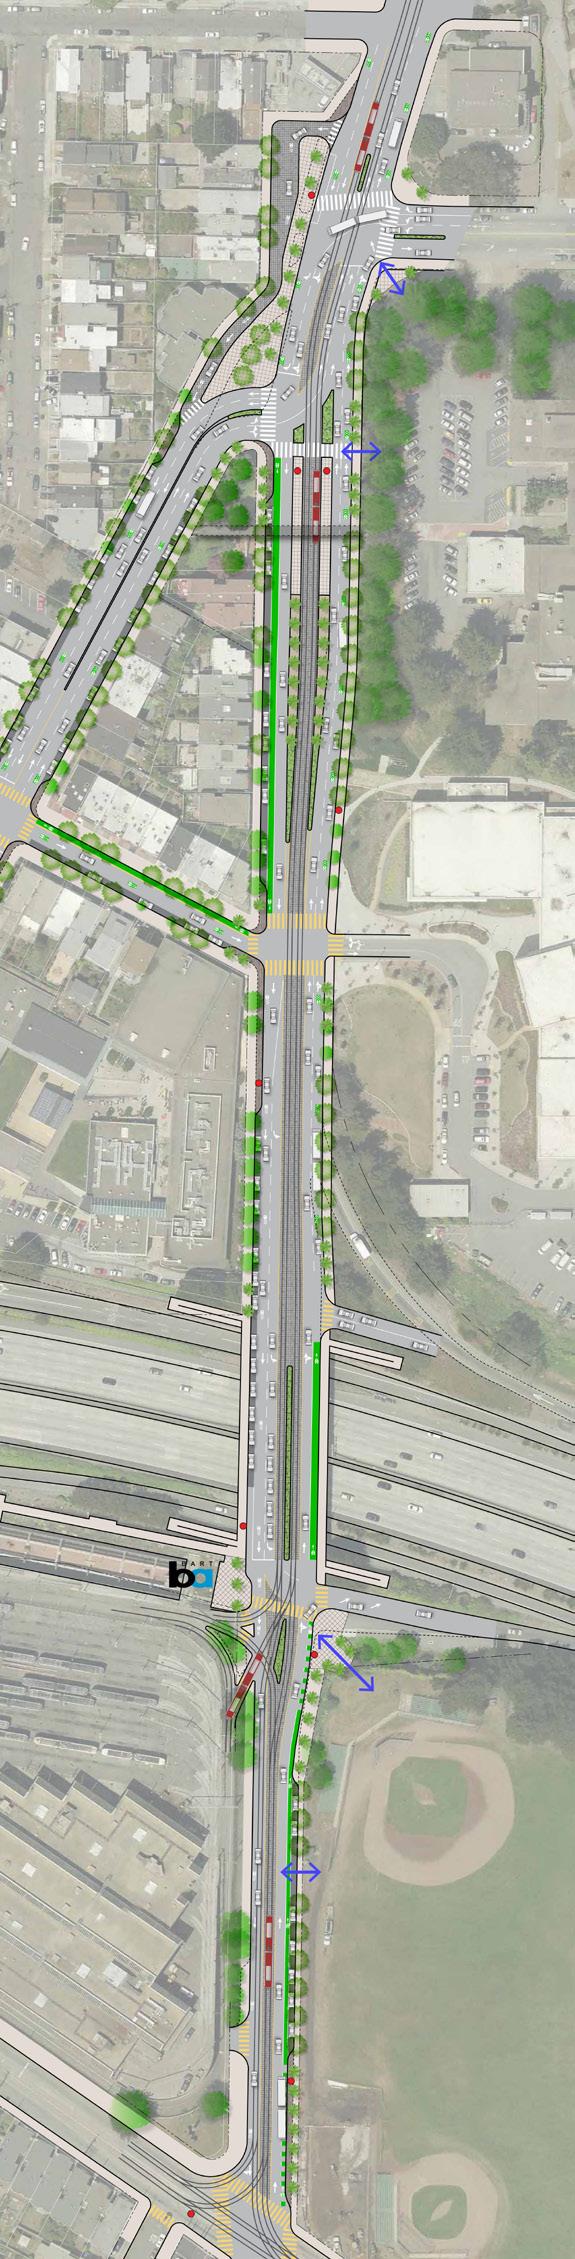 OCEAN AVENUE CORRIDOR DESIGN ROJECT WORSHO #4 Thank you for your interest in the Ocean Avenue Corridor Design project. lease take a few SURVEY minutes to complete this questionnaire.